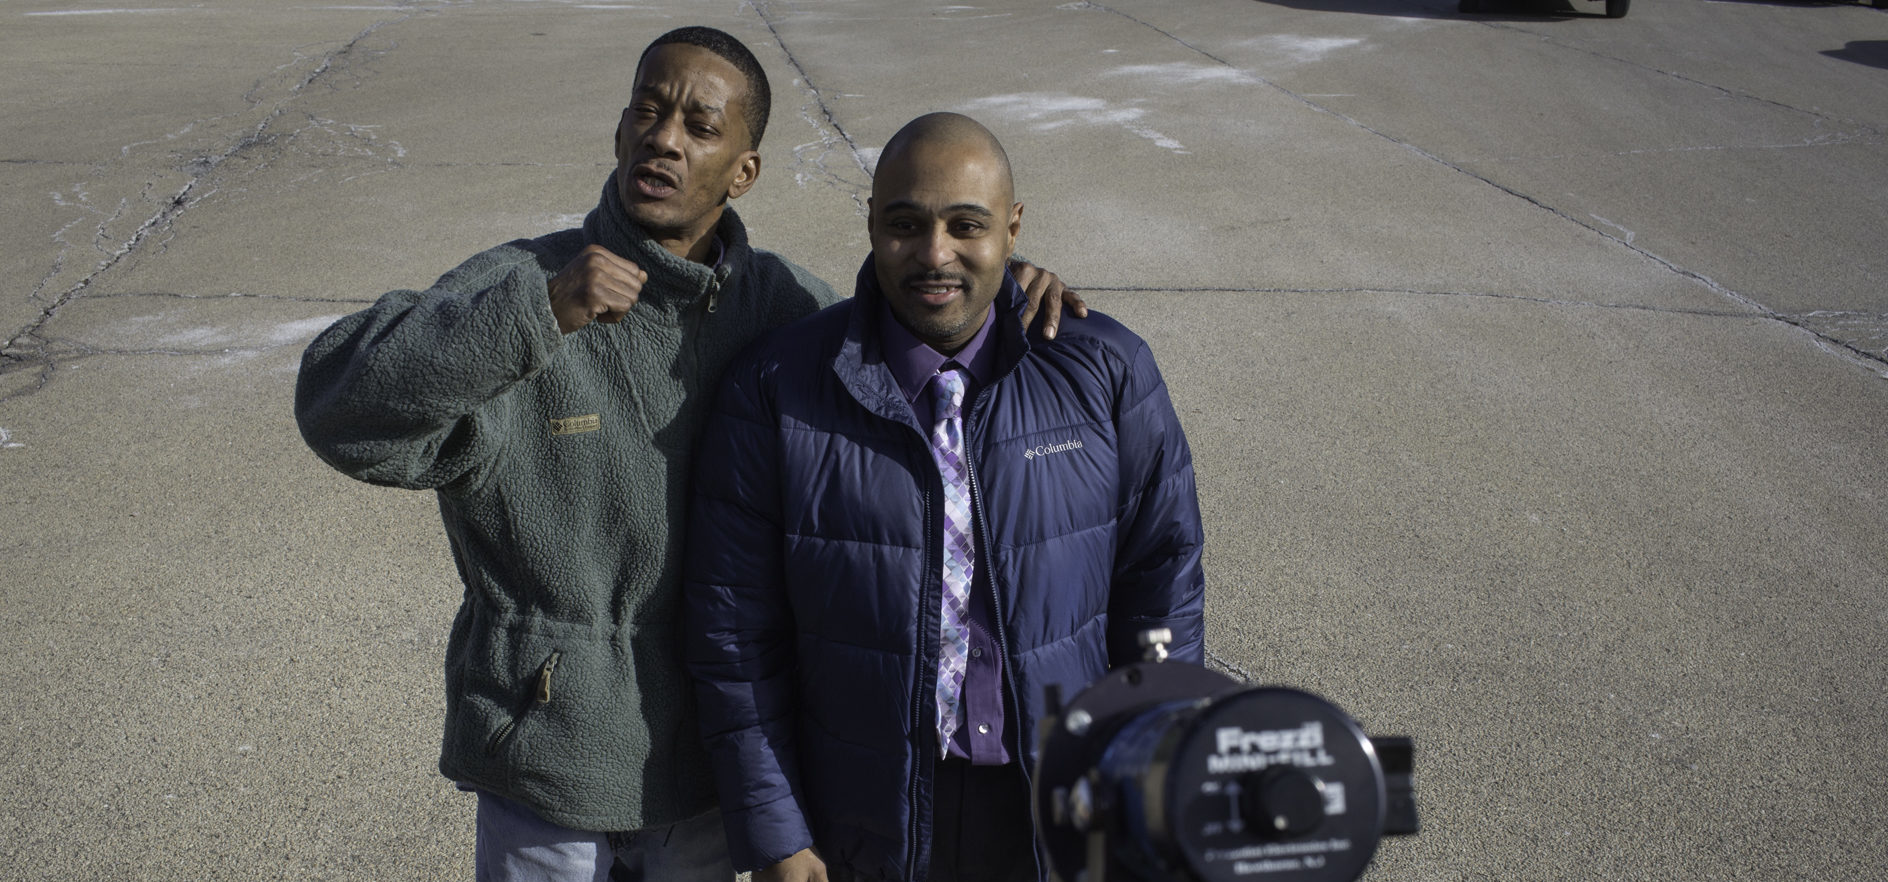 Kevin Bailey released from prison in Illinois after he and Corey Batchelor were exonerated. Photo by Zoran Orlic. 